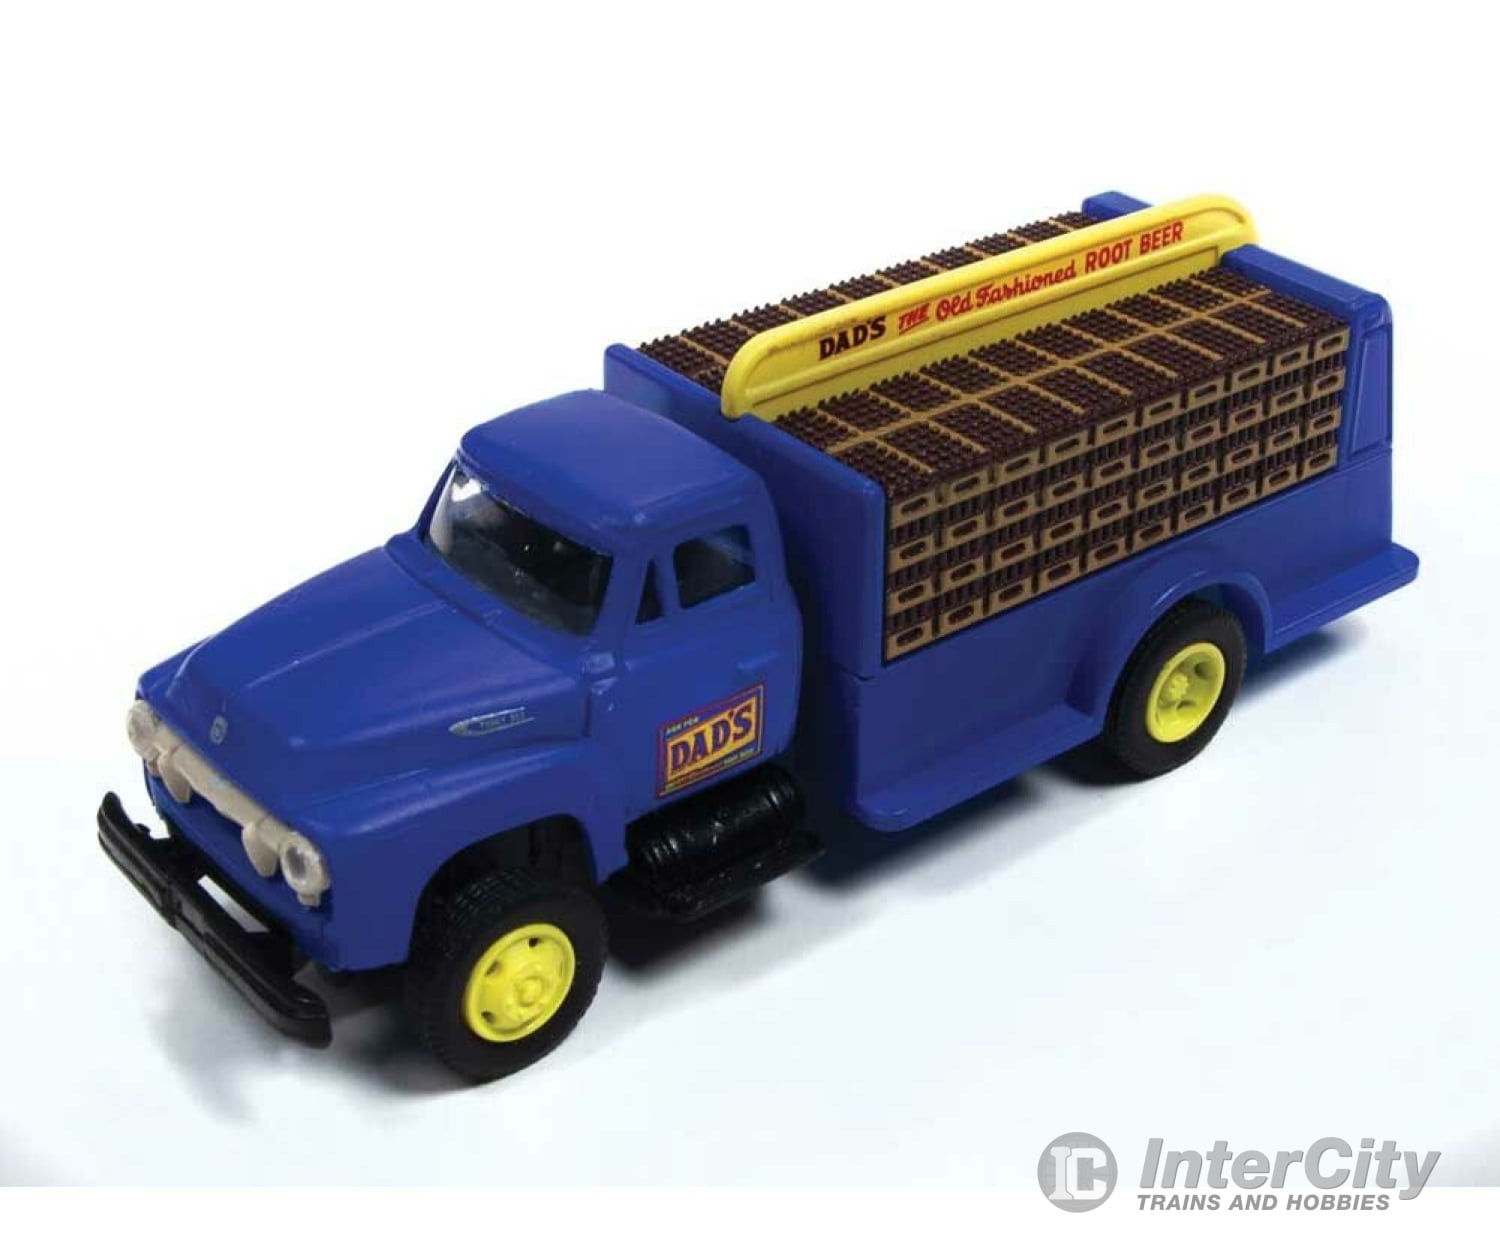 Classic Metal Works Ho 30538 1954 Ford Bottle Delivery Truck - Assembled Mini Metals(R) -- Dads Root